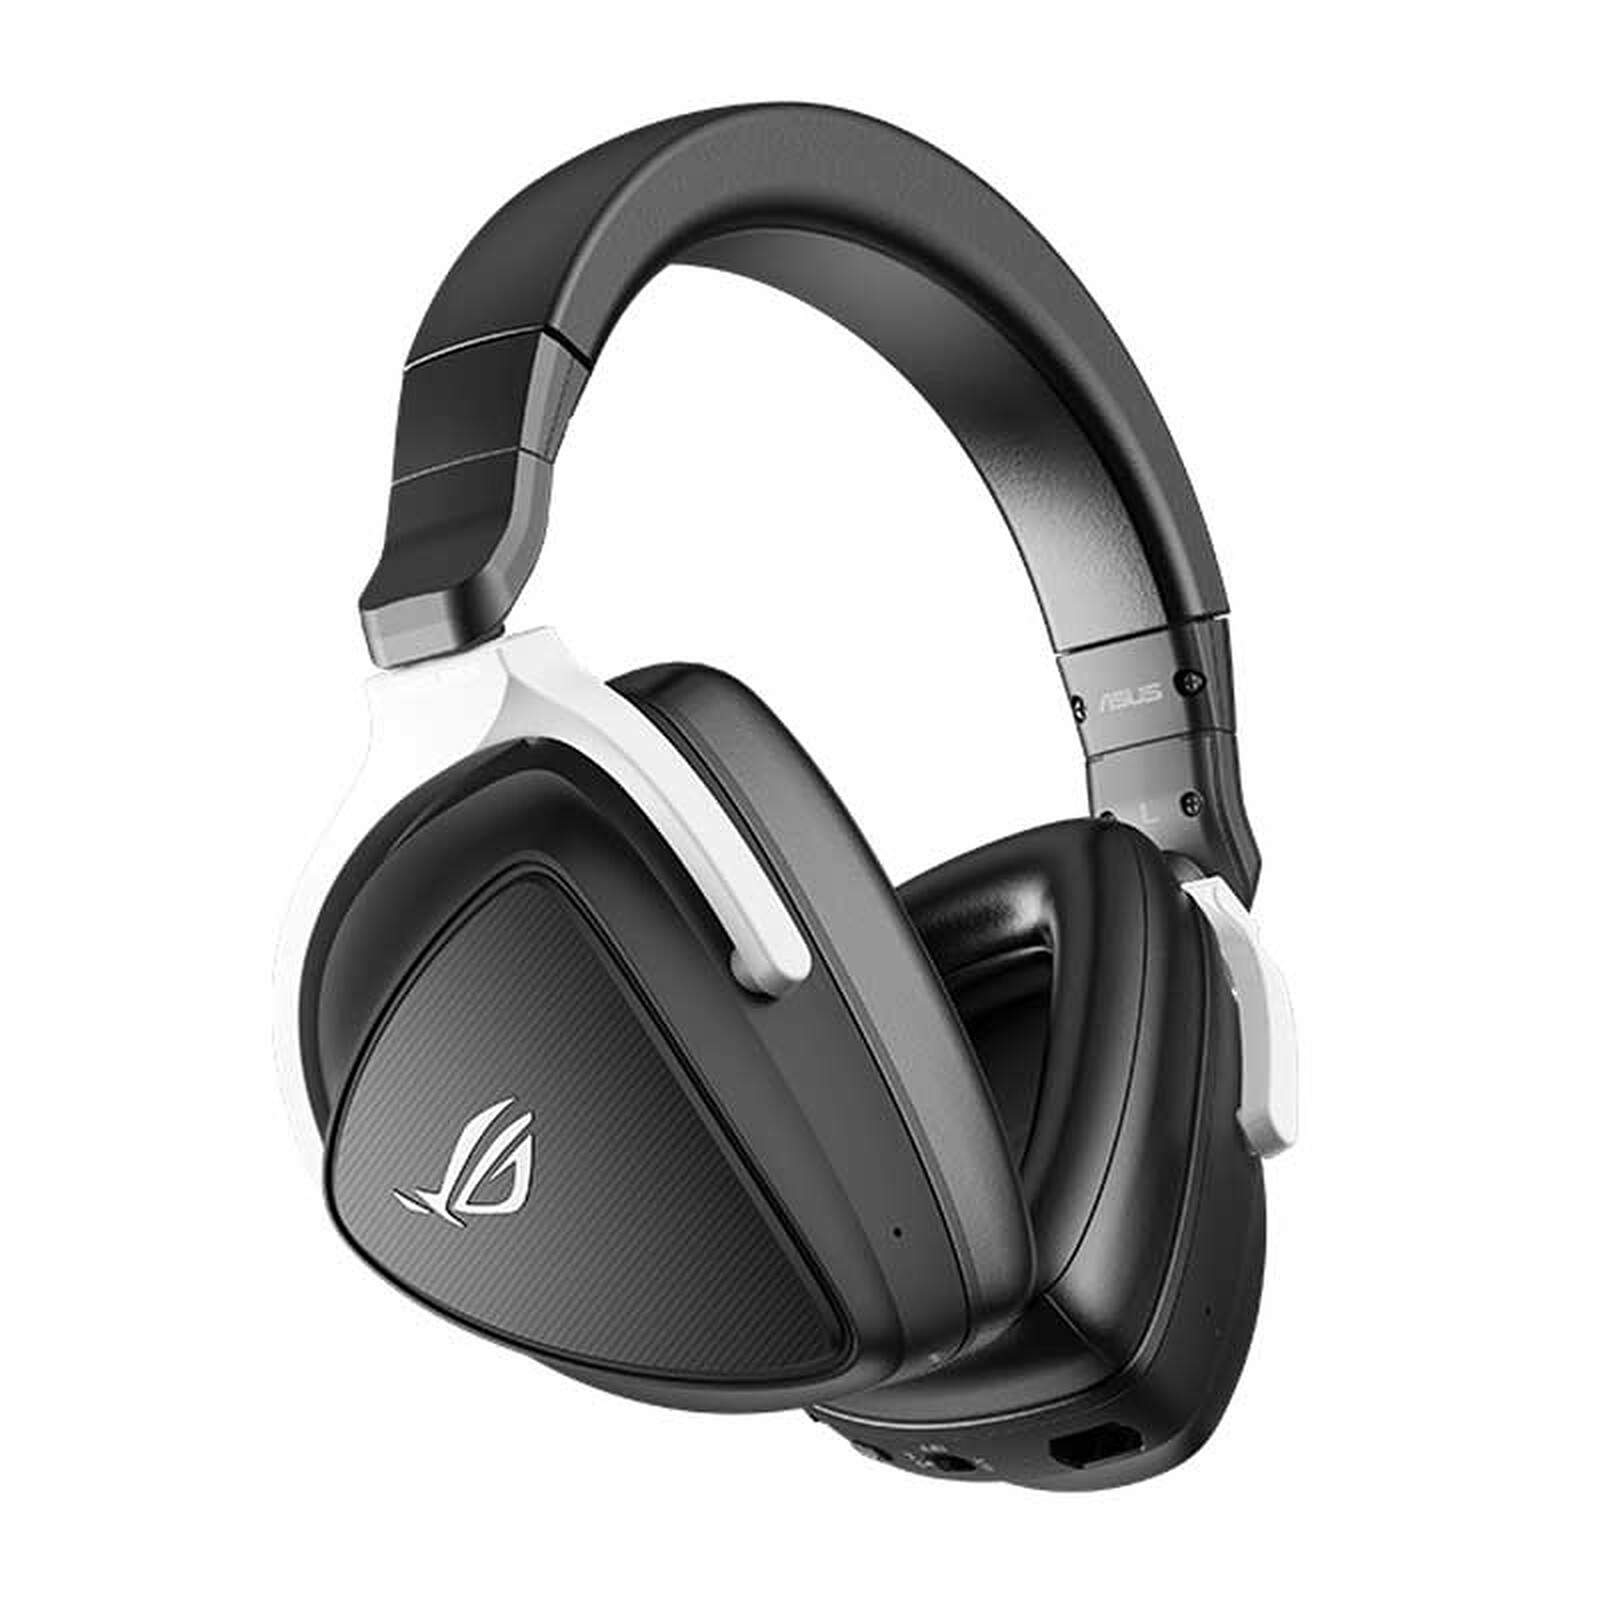 Asus ROG Delta S Wireless gaming headset review